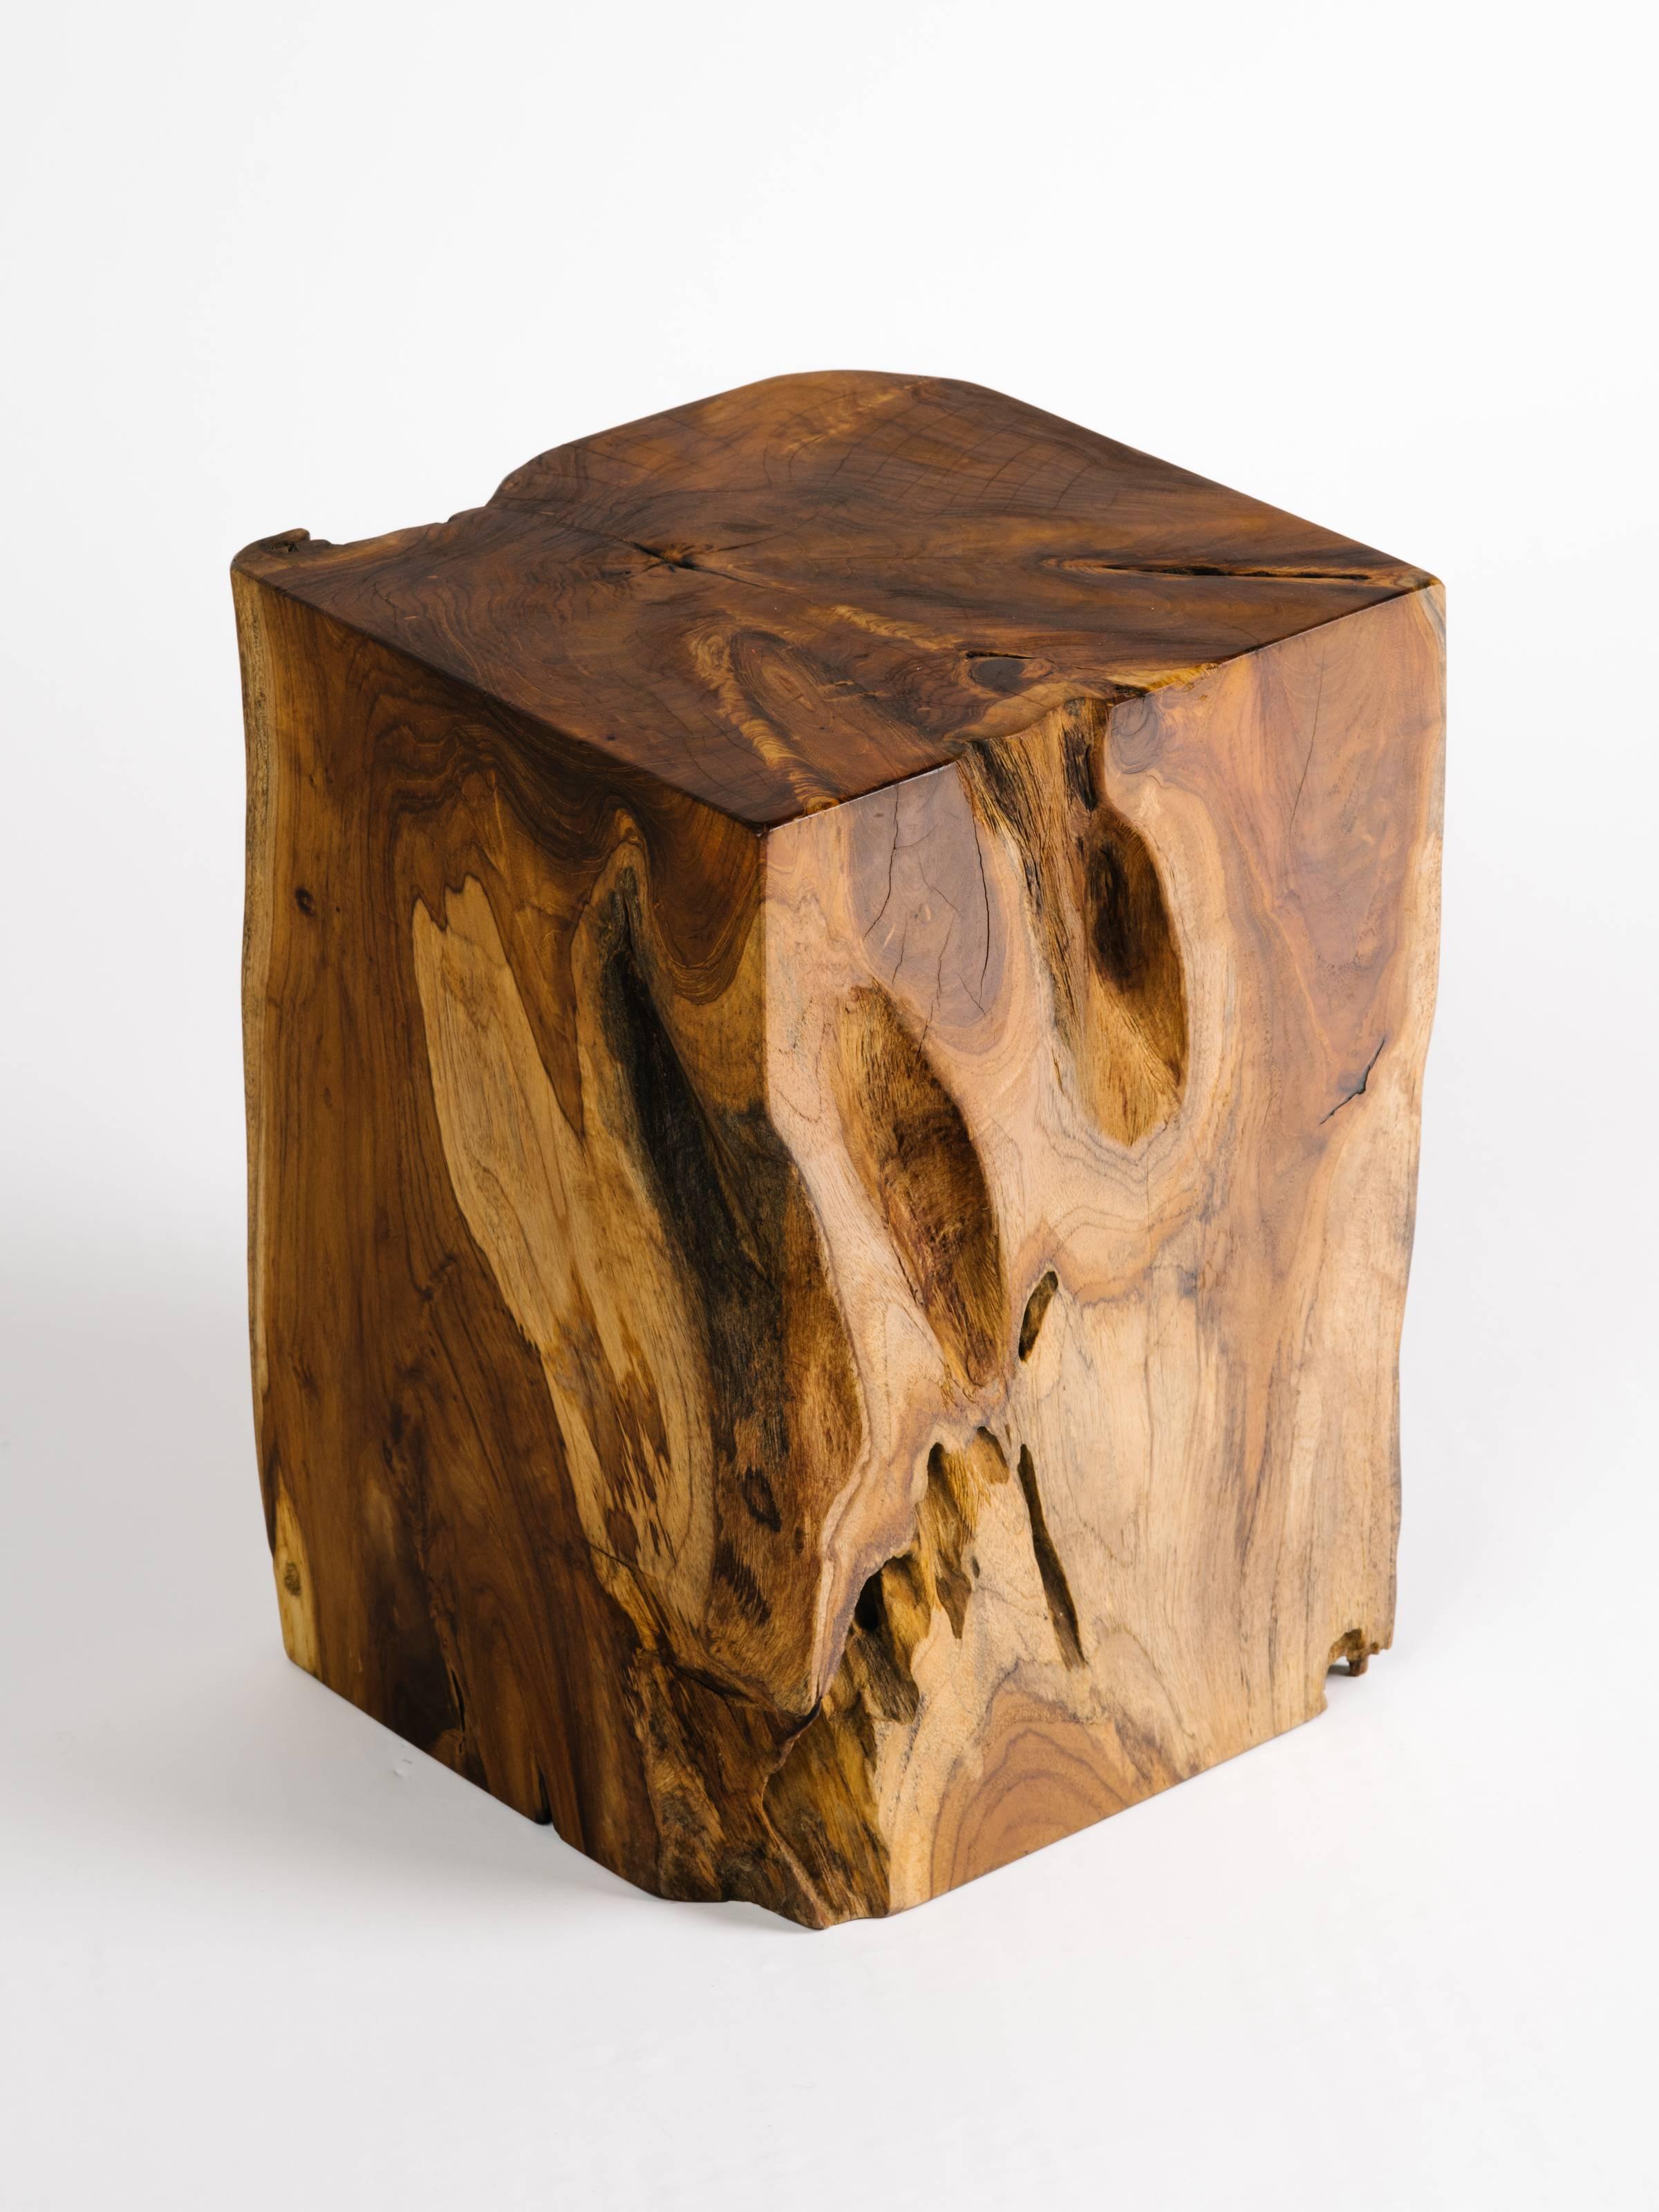 Organic modern cube side table or drink table made of teak root wood. Natural wood coloration and wood variations on all four sides.